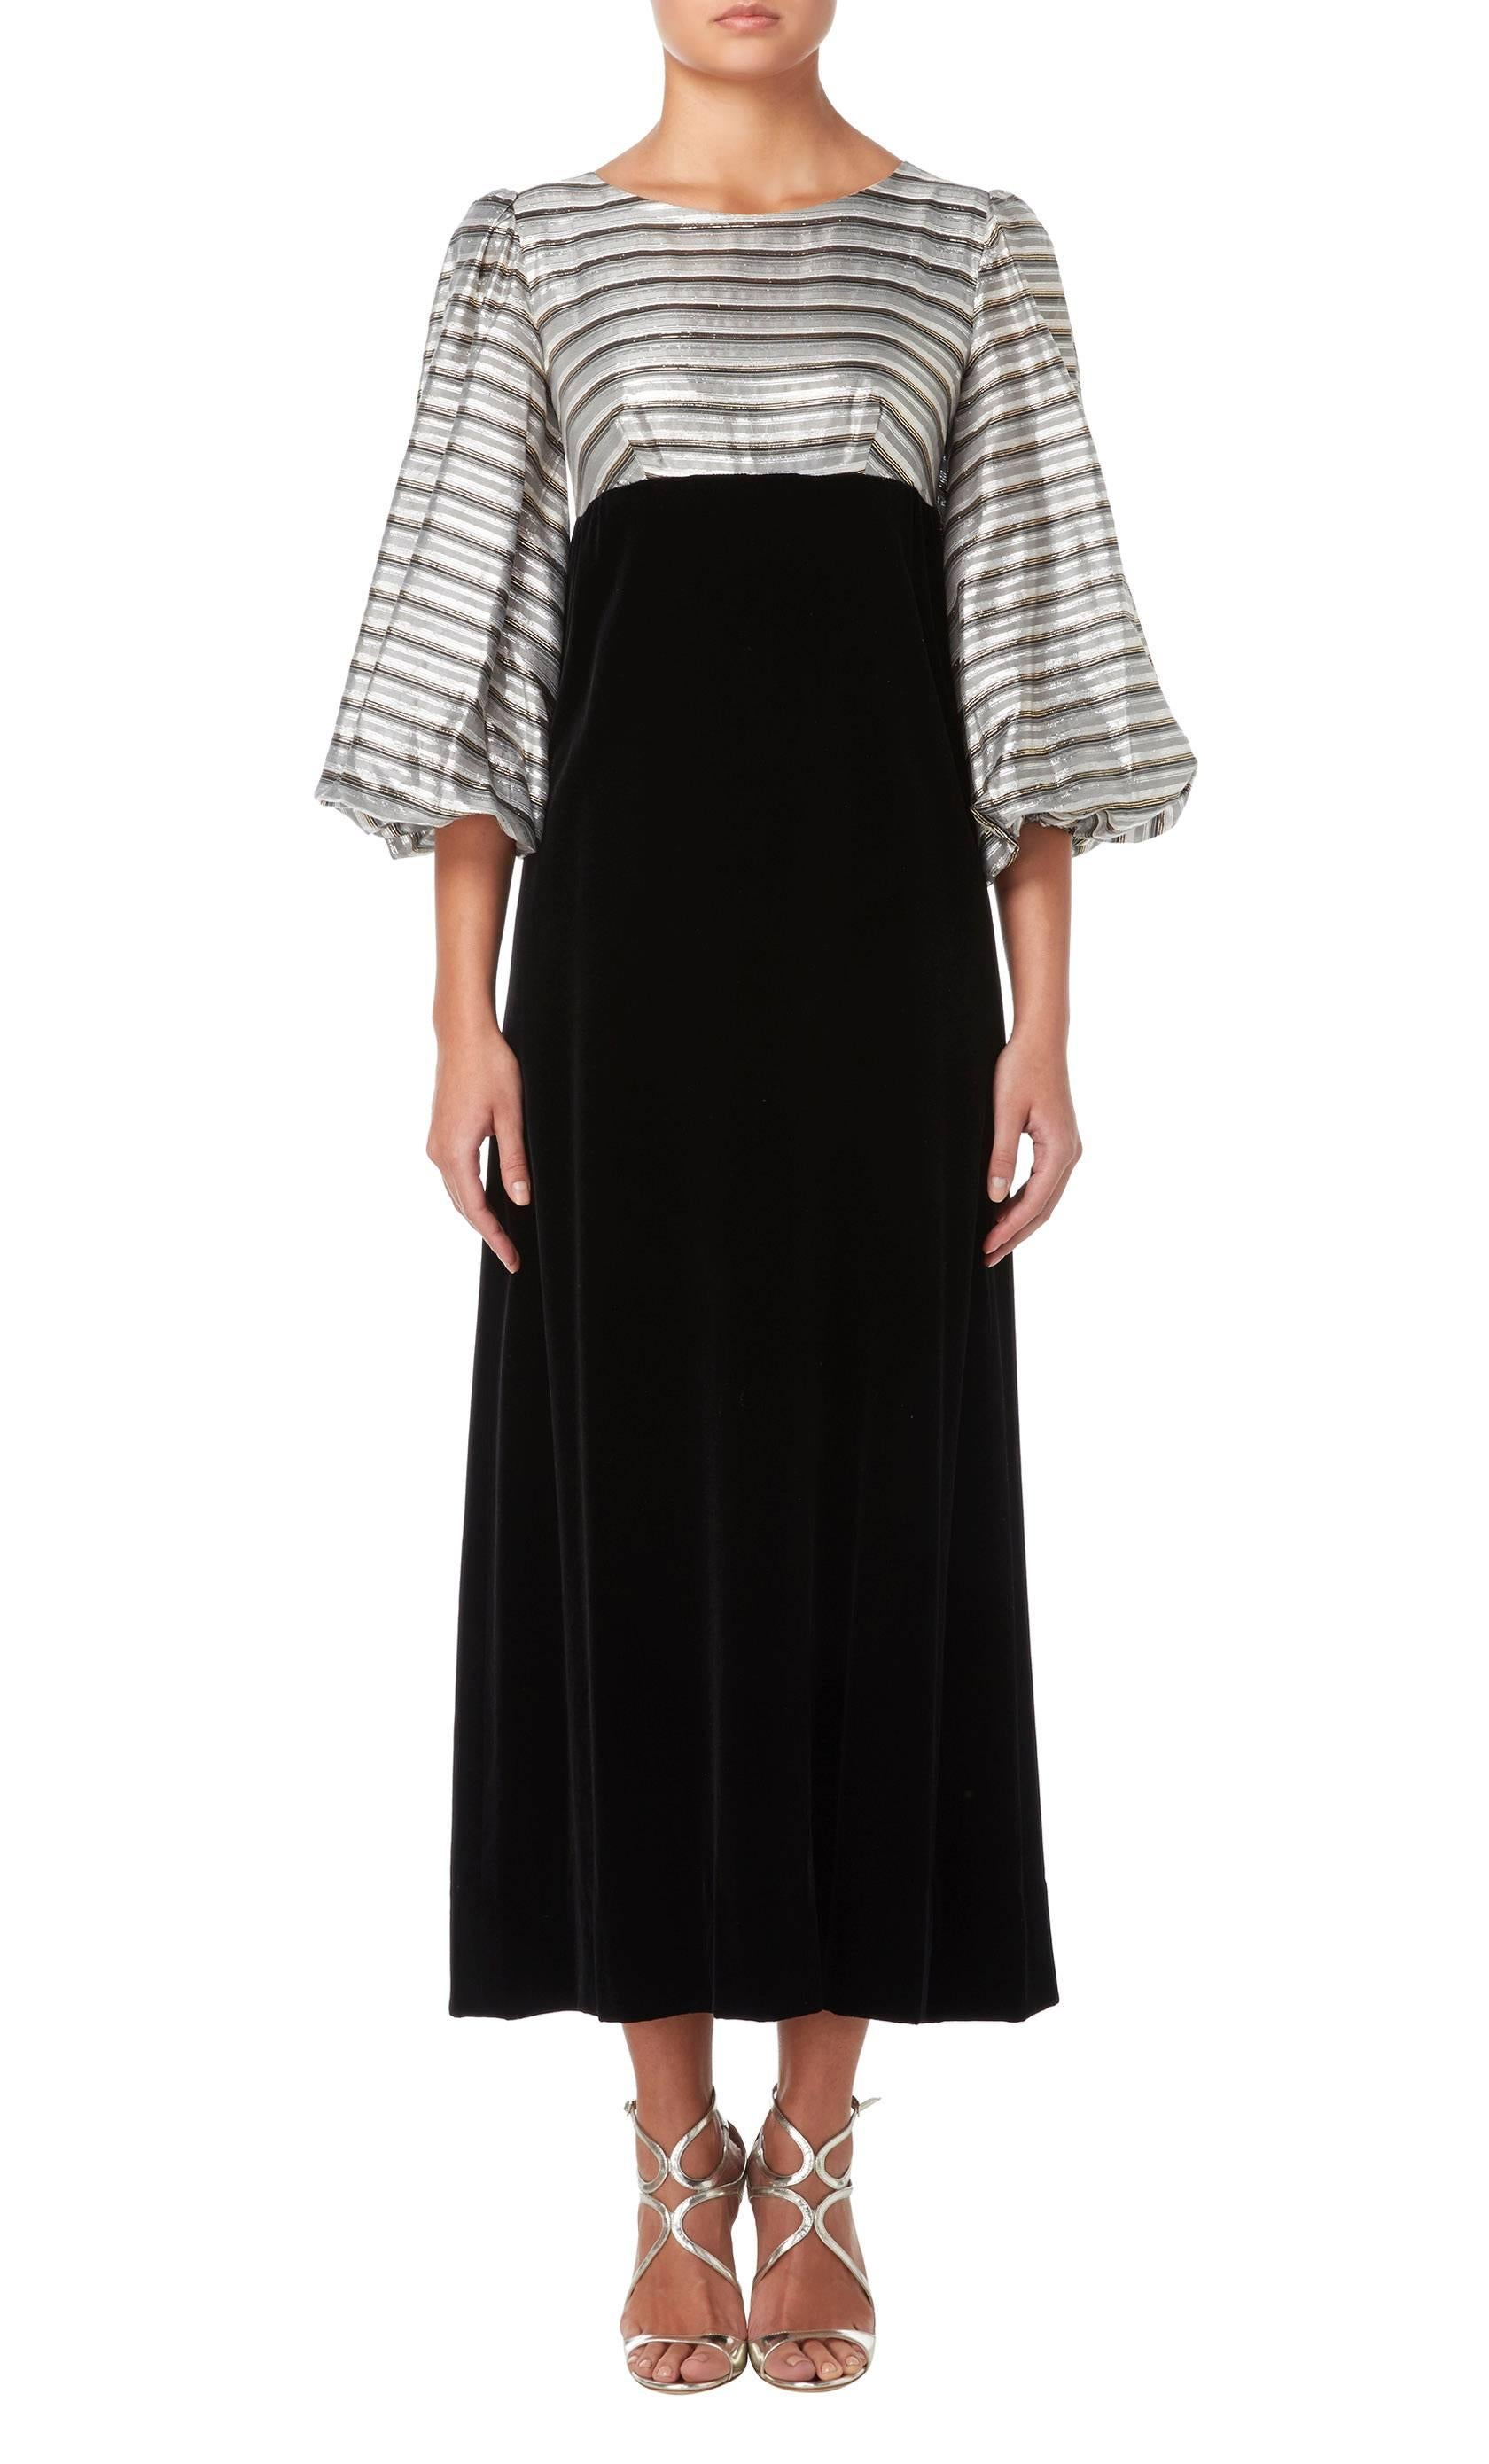 This Jean Varon maxi dress would make a fun option for a party or event. The body and wide balloon sleeves are constructed in a metallic fabric featuring horizontal strips in grey, silver, gold and black, while the black velvet skirt falls from